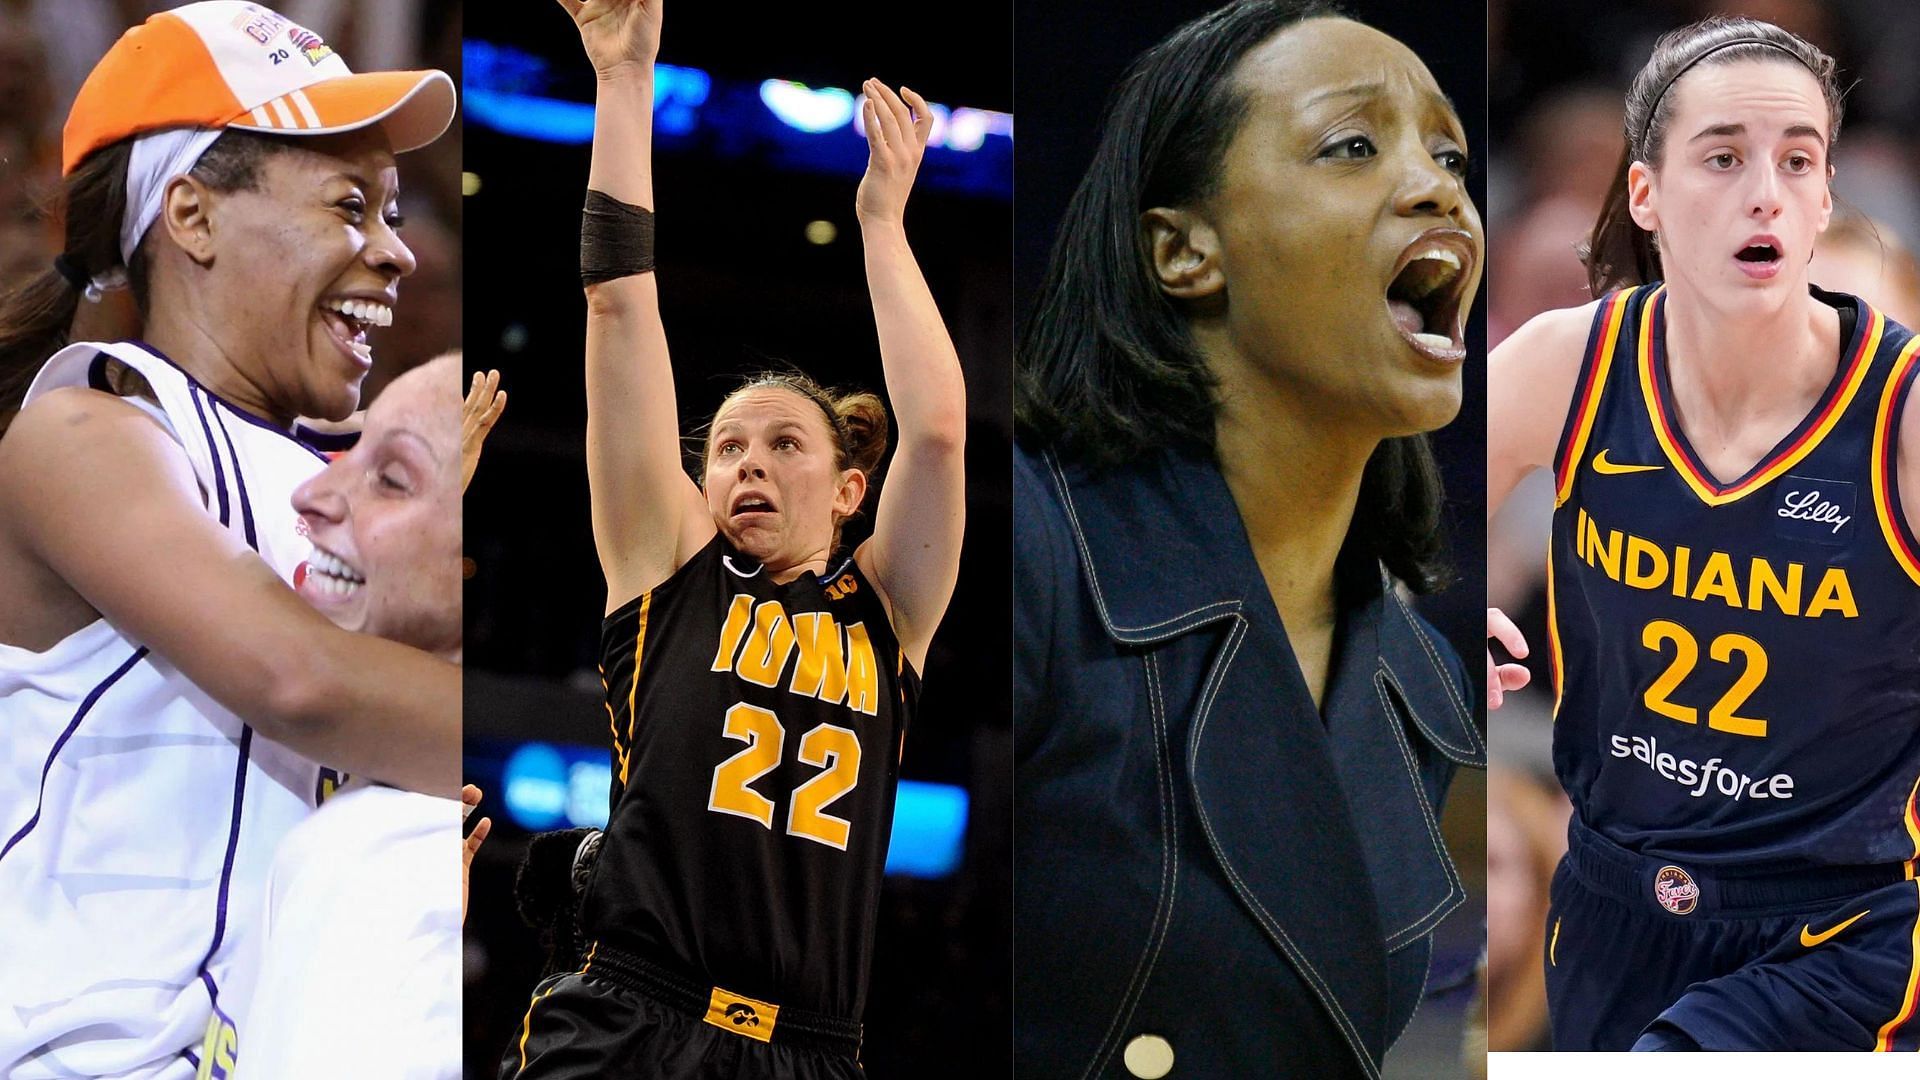 Top Iowa players to play in the WNBA